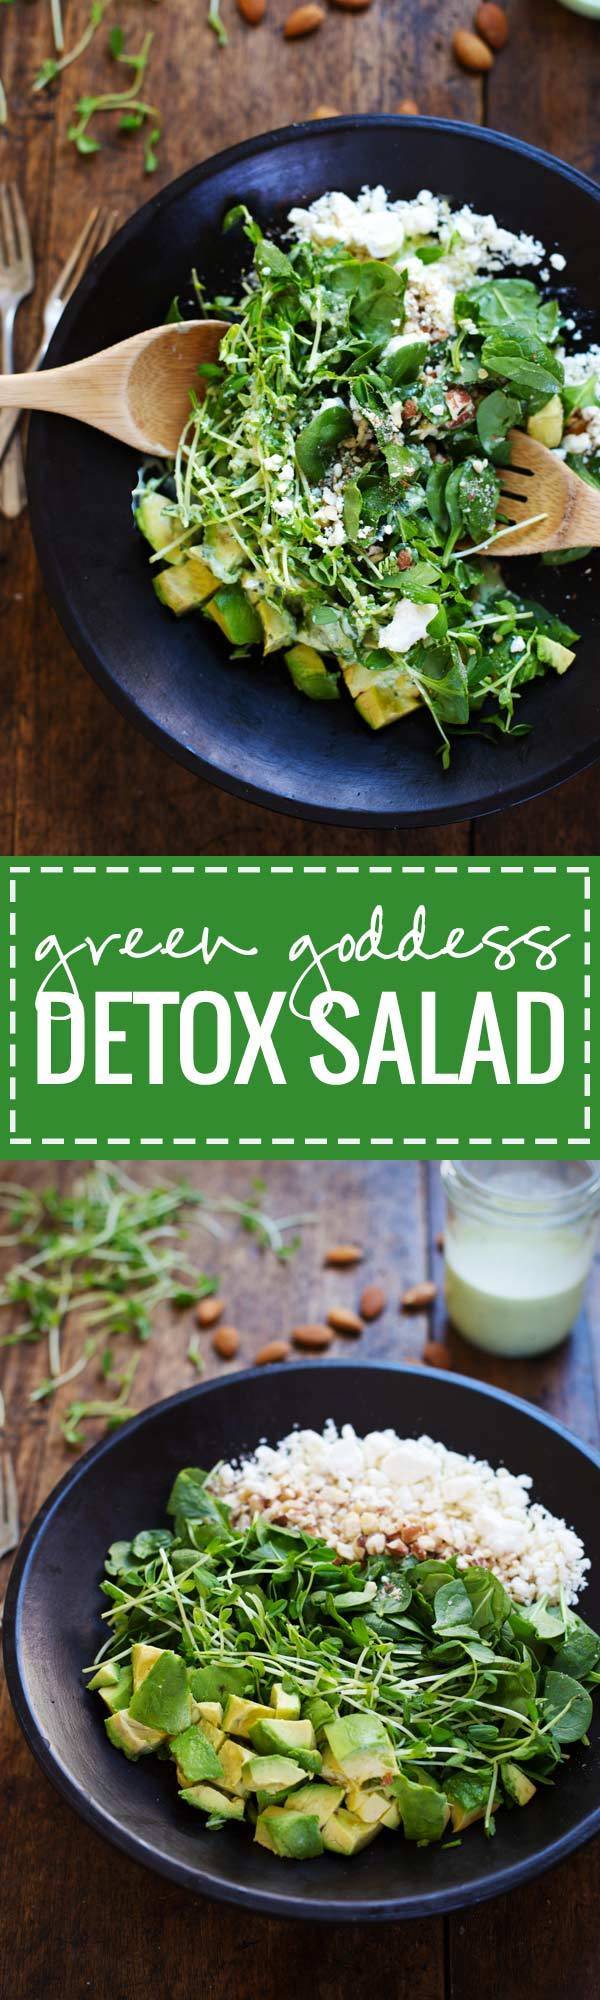 This Green Goddess Detox Salad has lots of good for you ingredients like avocado, almonds, herbs, and a delicious Green Goddess dressing.